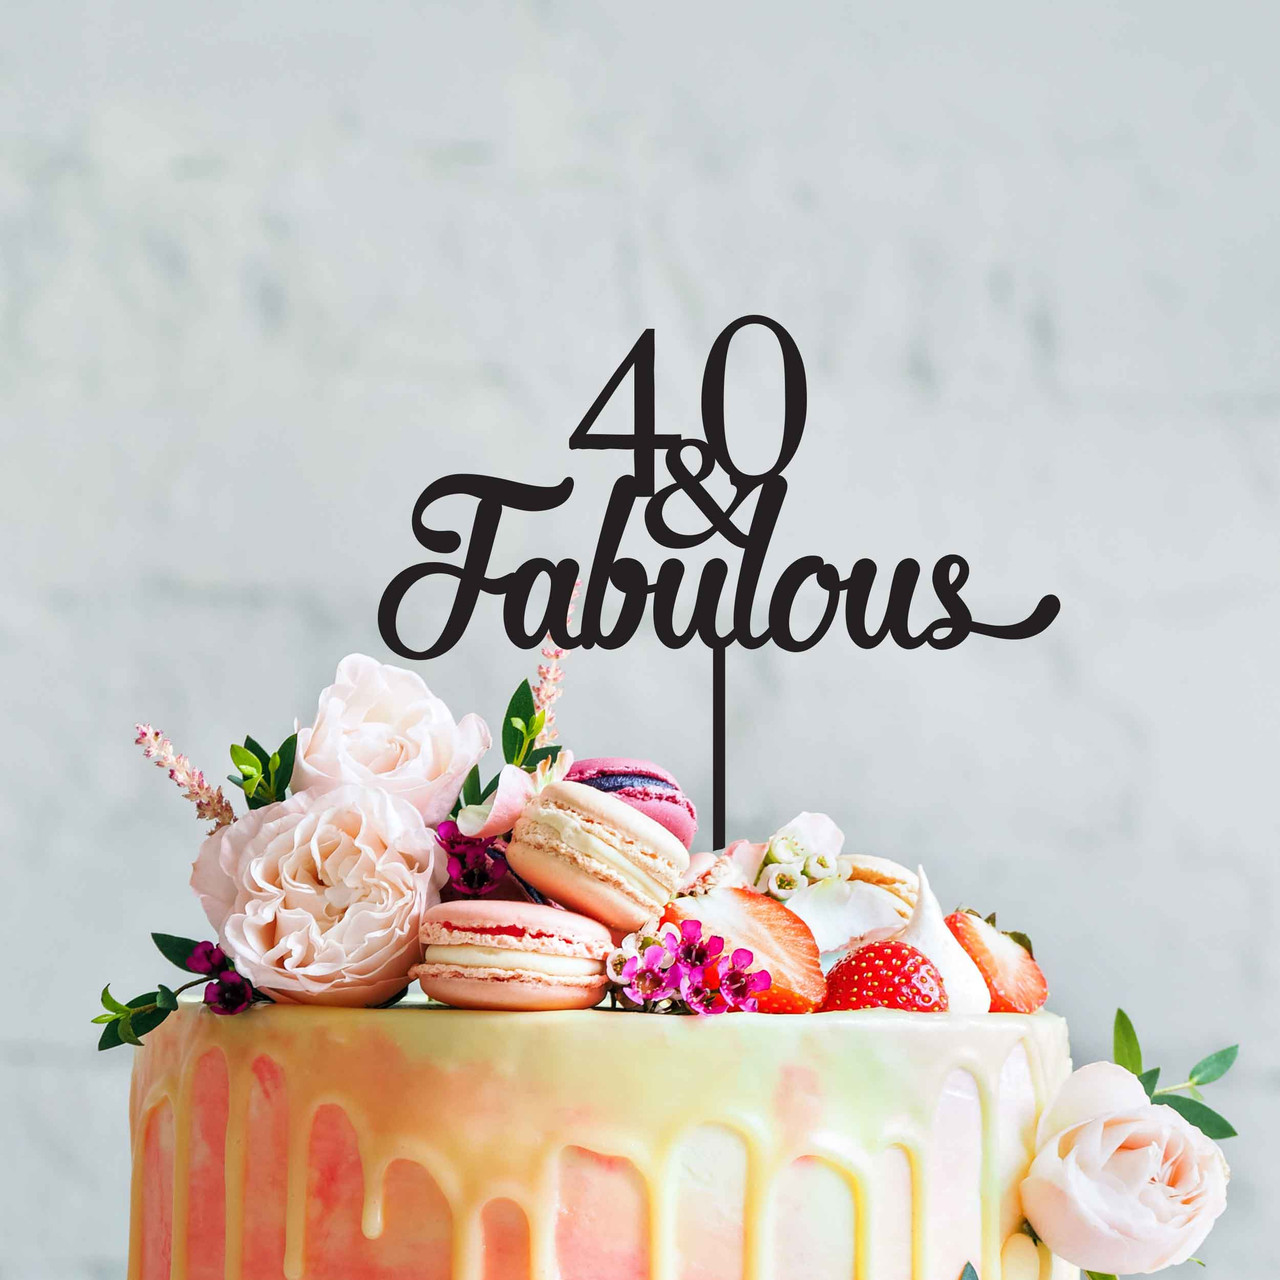 40th Birthday Cake | Simply Sweet Creations | Flickr